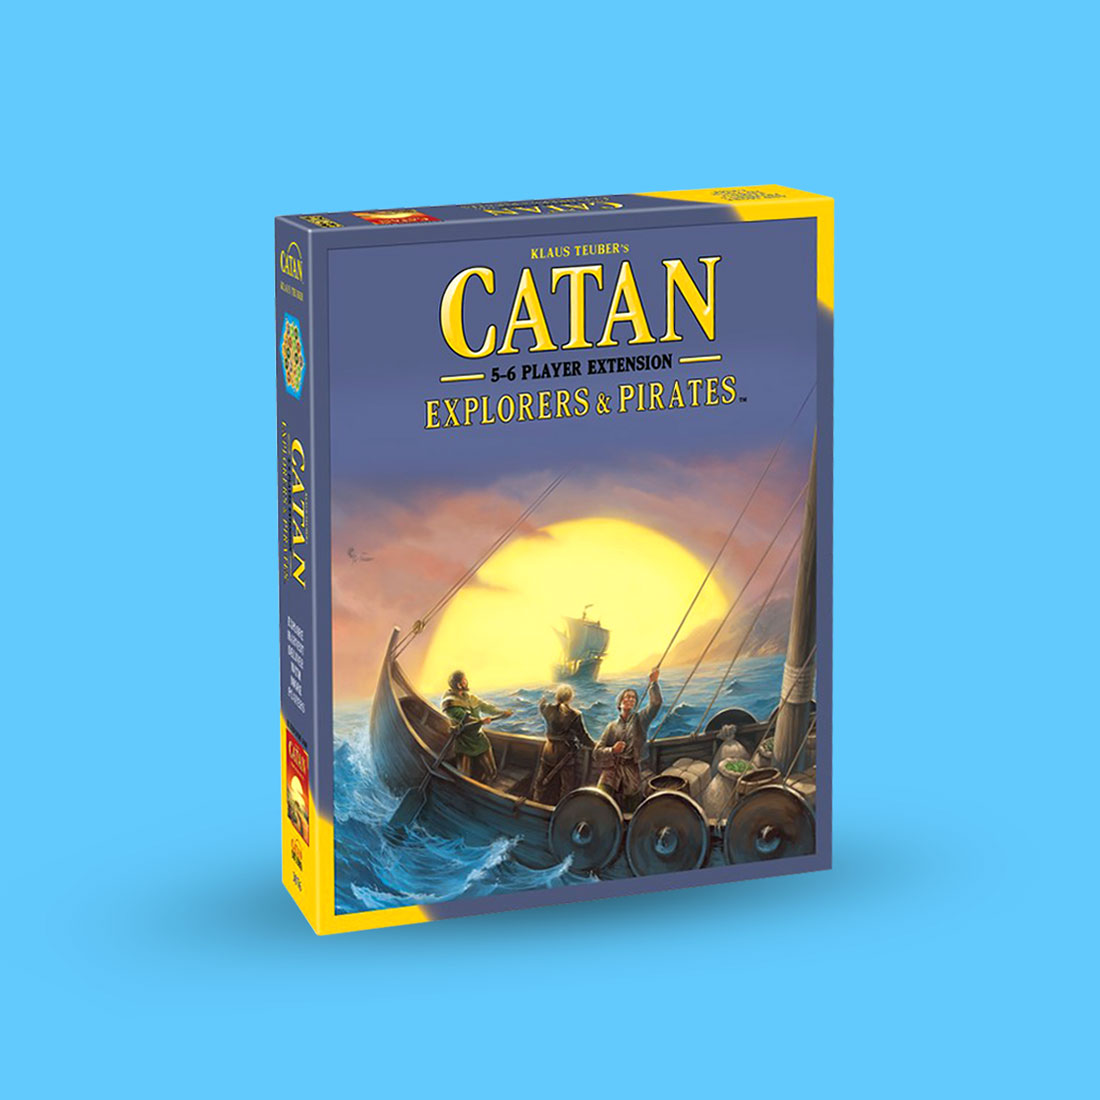 Catan Traders & Barbarians 5-6 Player 5th Edition Extension Game Catan Studio 